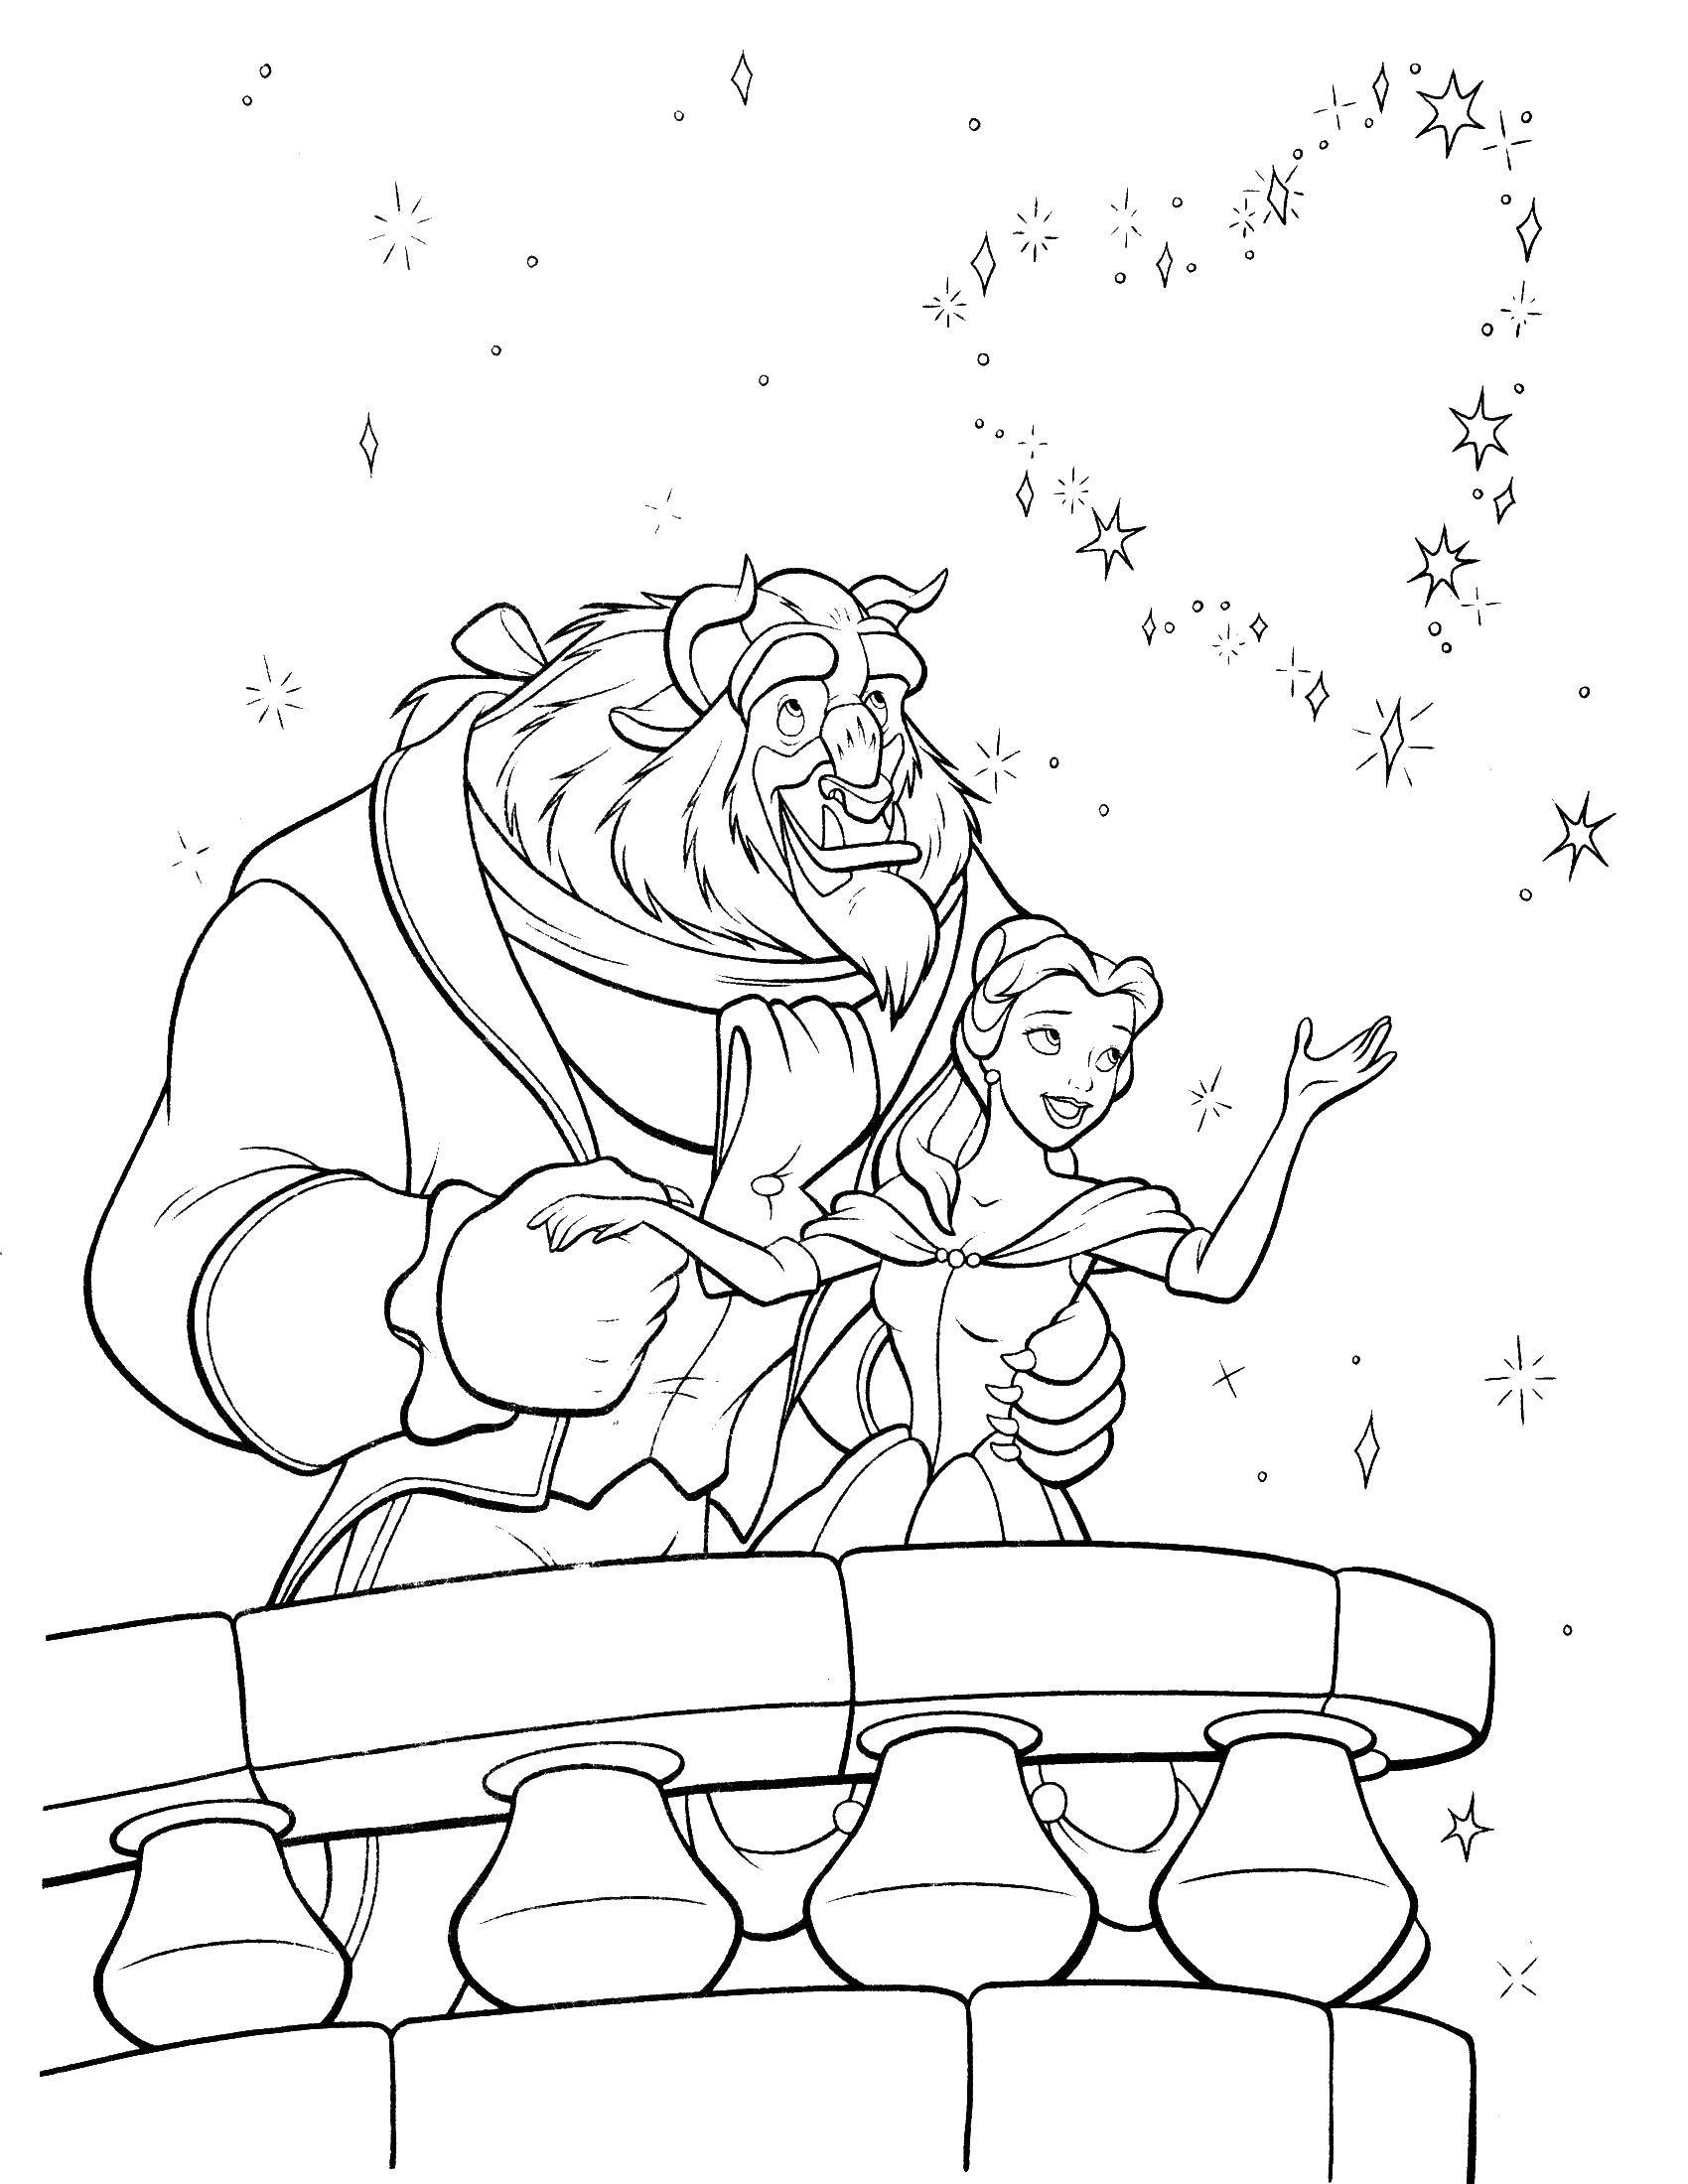 Coloring Beauty Belle and the beast looking at the fireworks. Category coloring fireworks. Tags:  fireworks, Beautiful Belle, the beast.